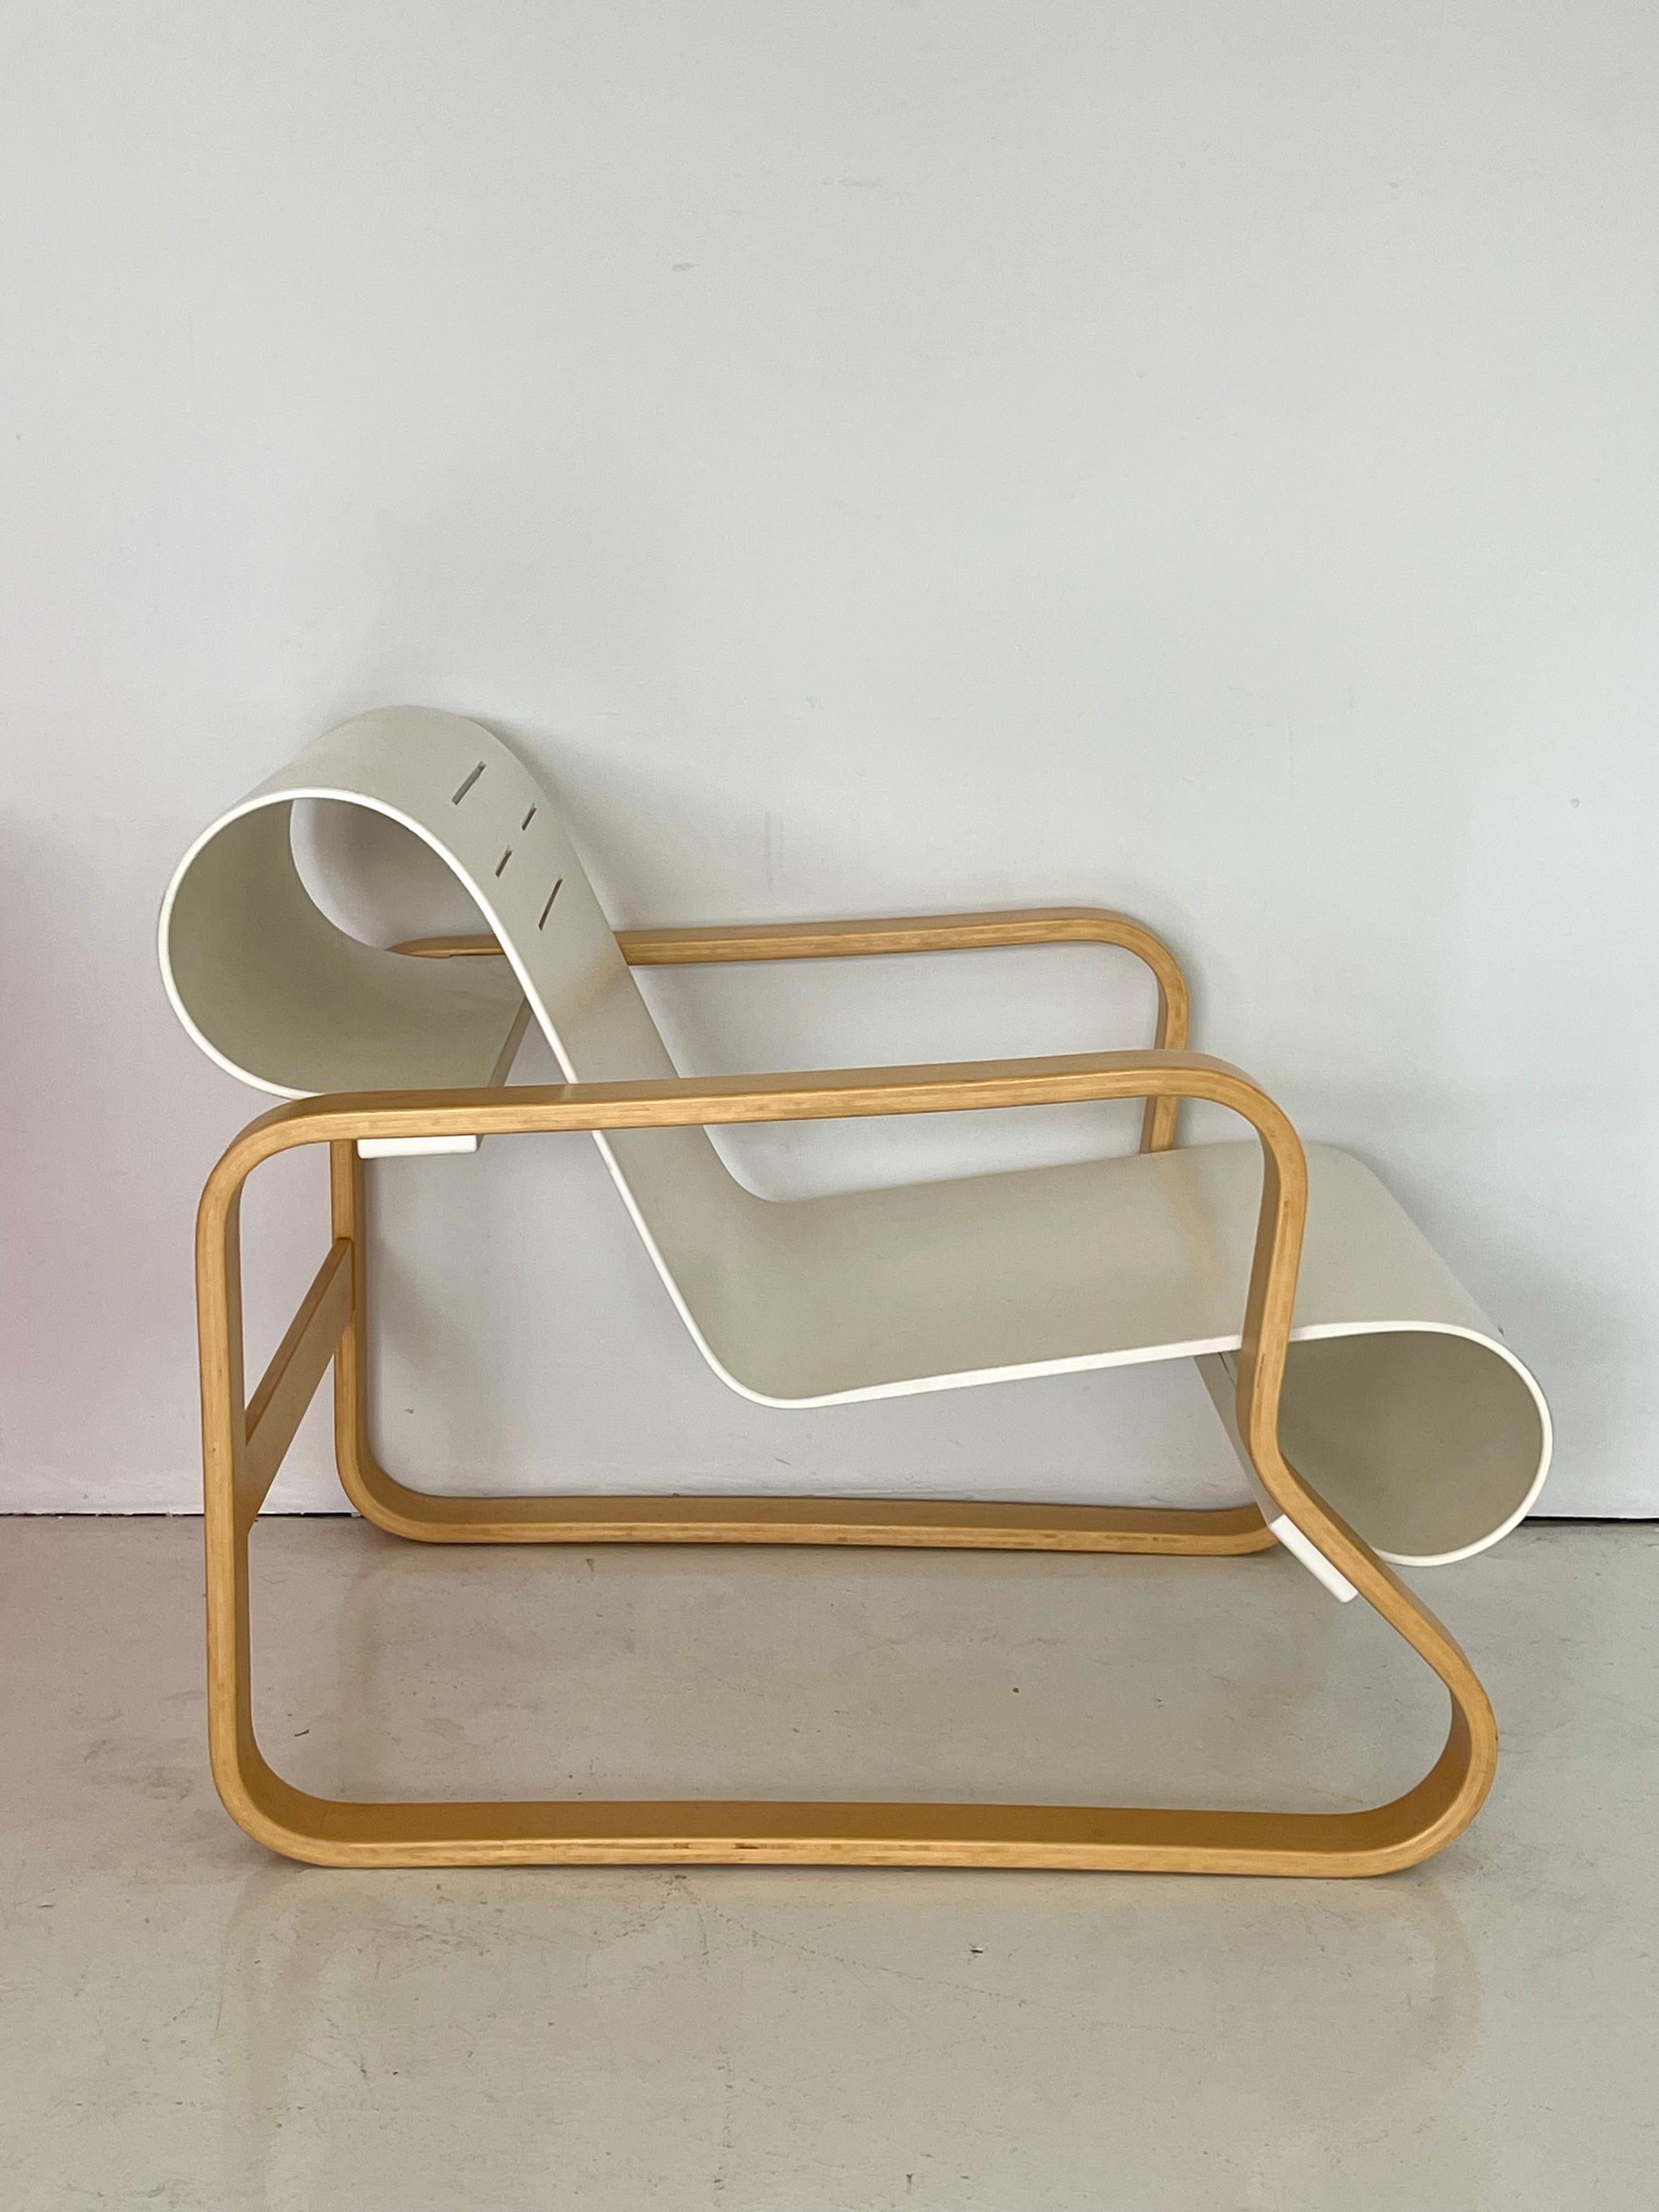 Paimio Chair in bentwood frame with white laminate seat. Iconic design by Alvar Aalto in 1929 this version was produced by Artek in 2002 and retains its original label. Good condition with minor surface wear.